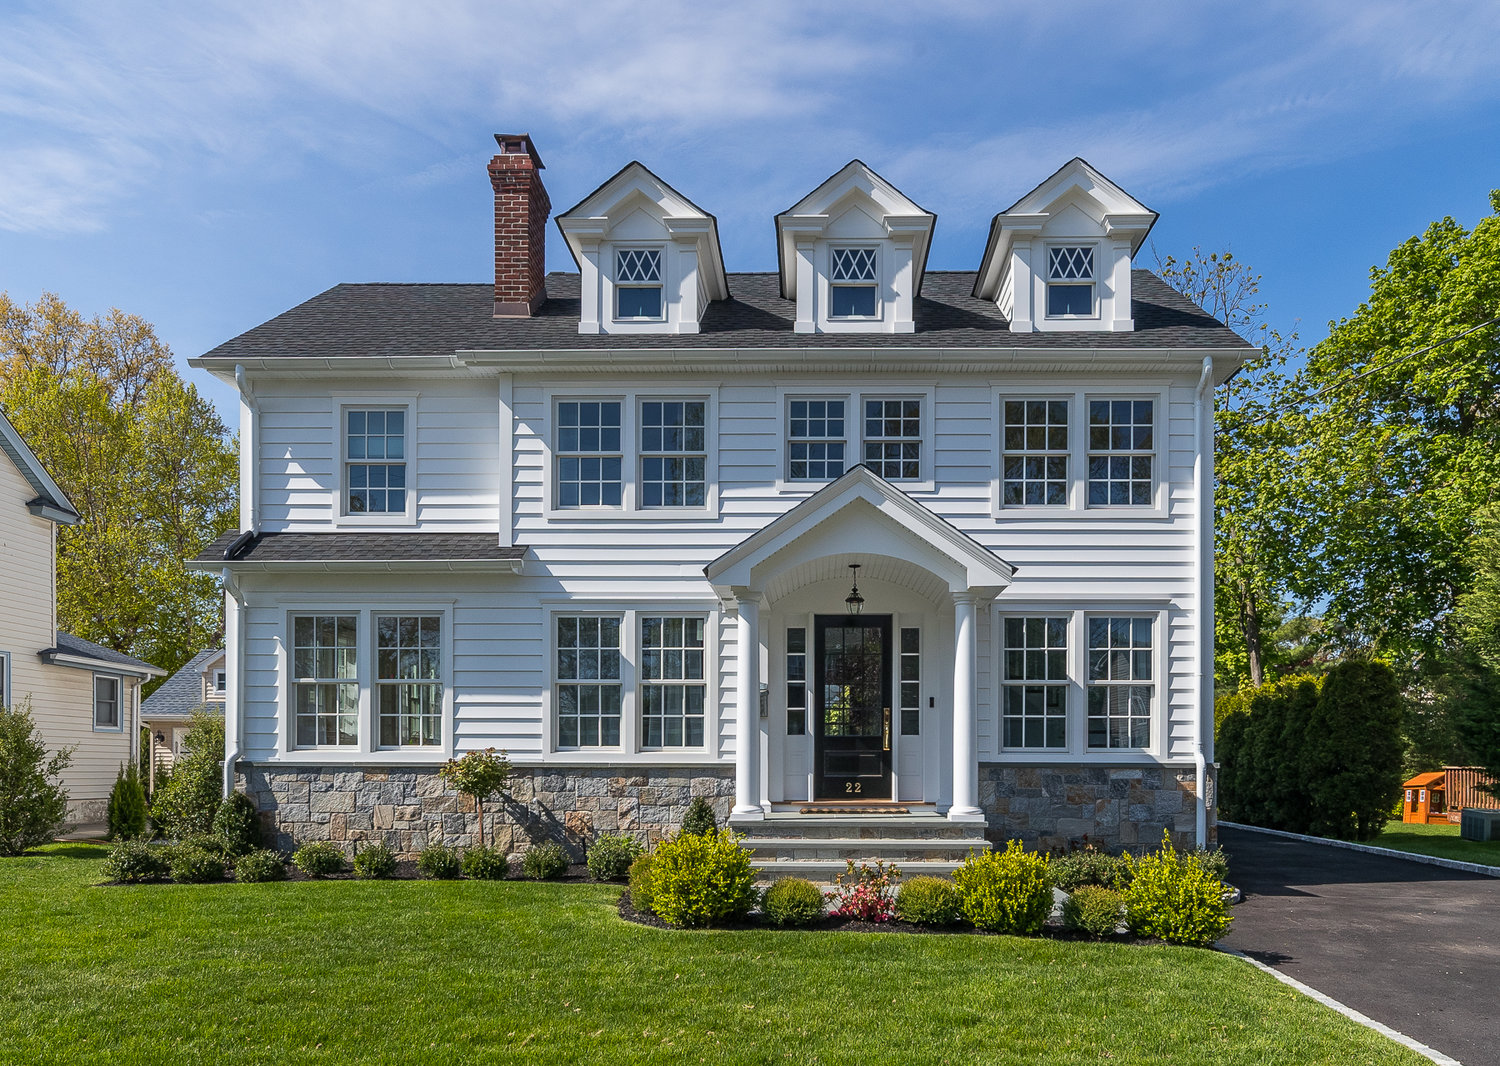 This home on Hampton Court recently sold for $1,670,000. It was listed at $1,685,000.